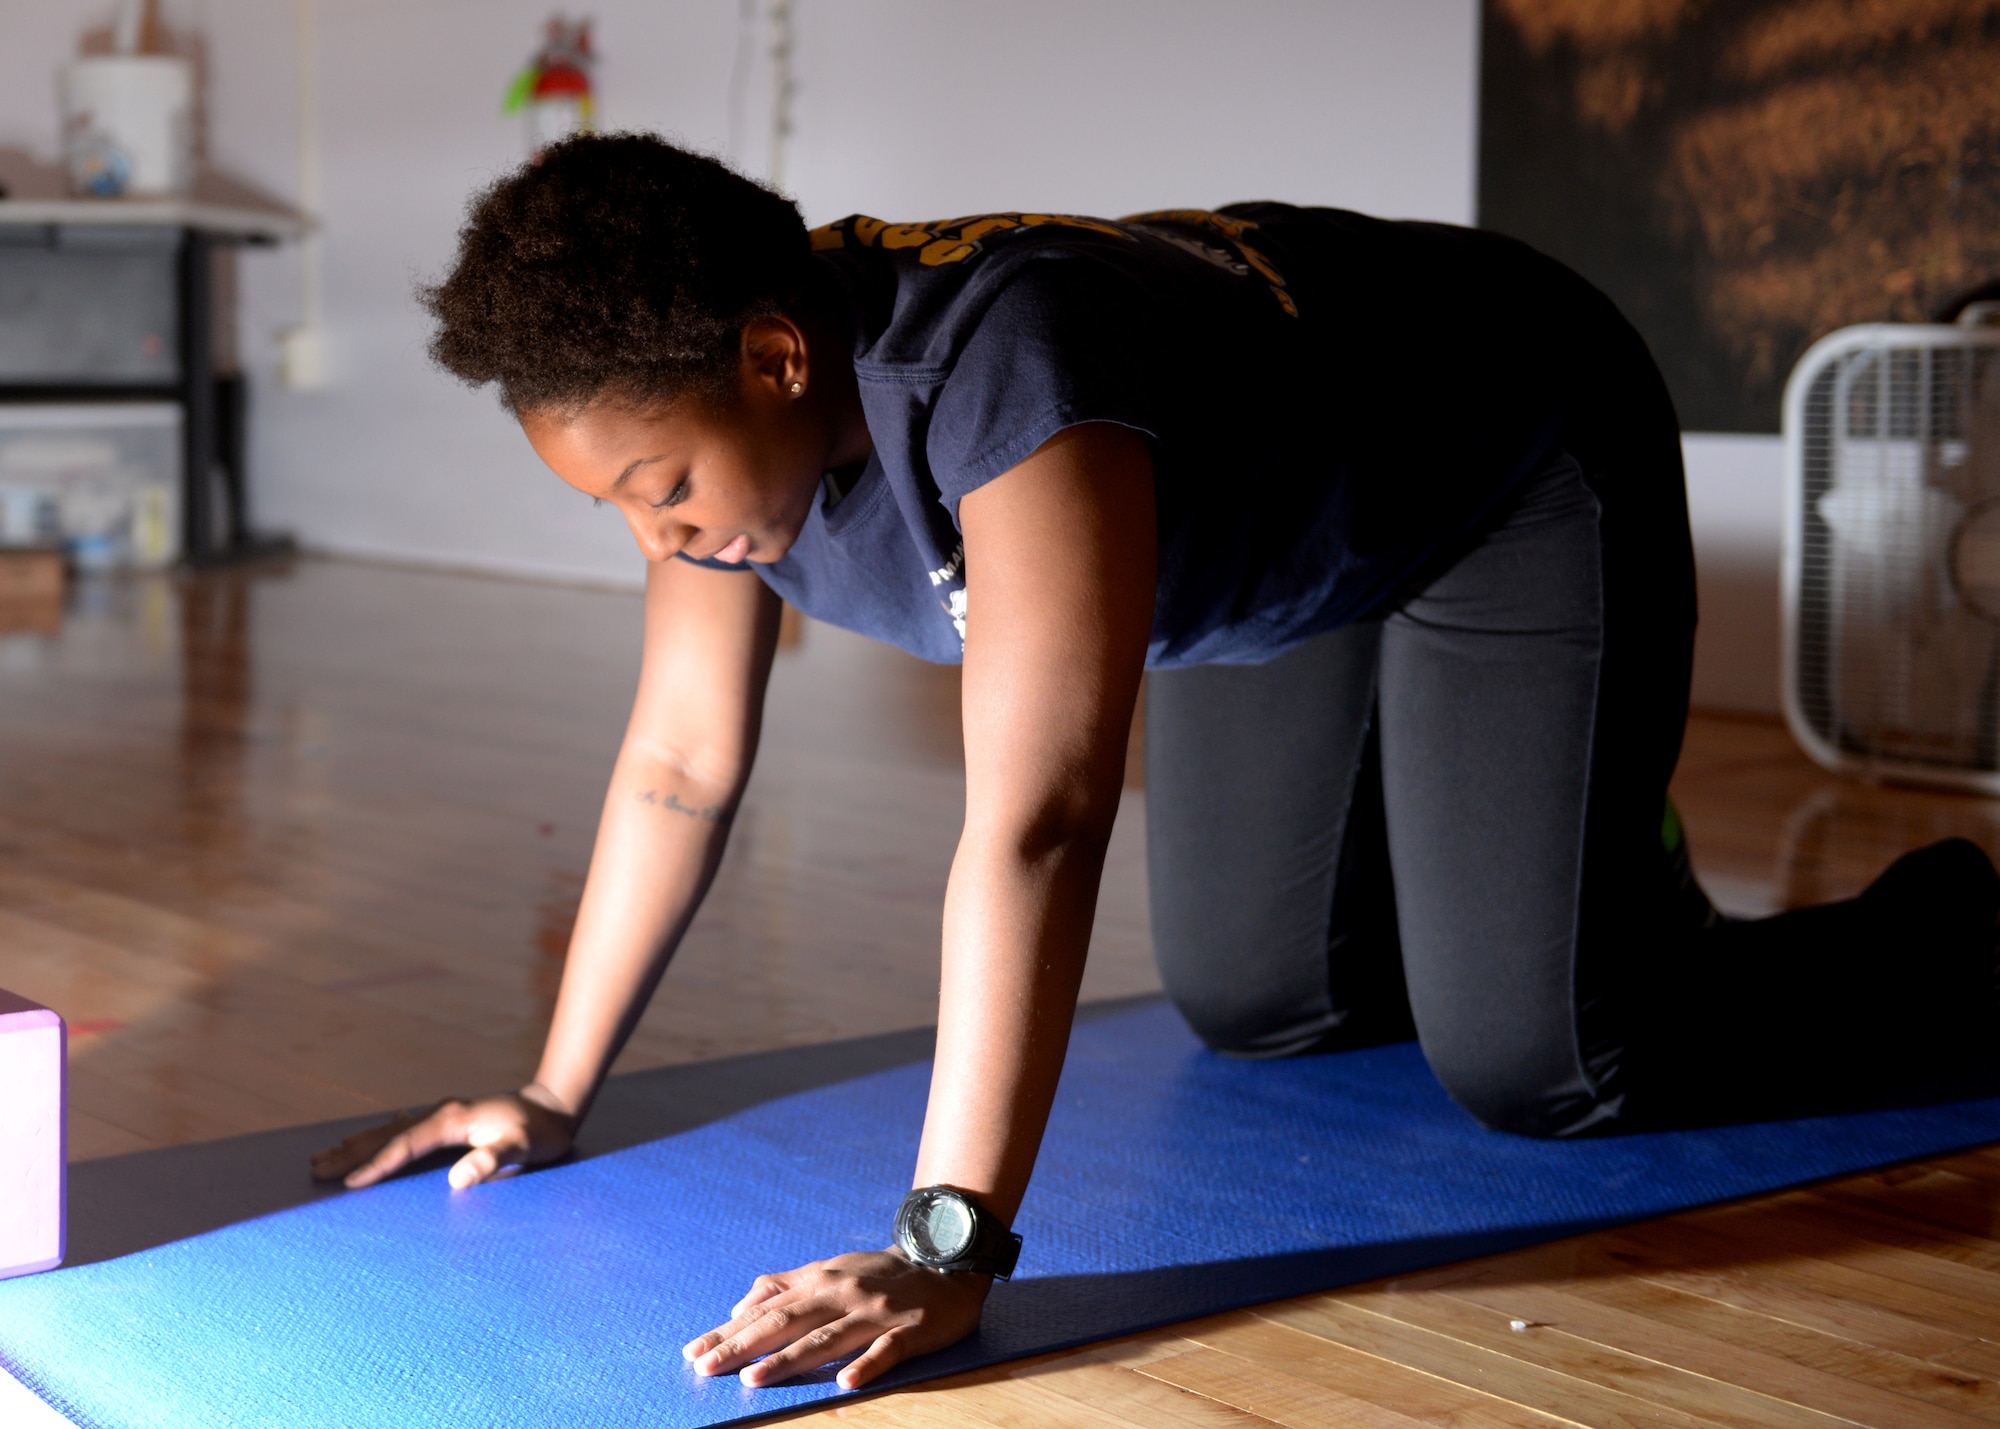 ALTUS AIR FORCE BASE, Okla. – U.S. Air Force Airman 1st Class Vinecia Anderson, 97th Medical Operations Squadron dental assistant, participates in a Yoga Unwind class at the base fitness center, March 3, 2015. Yoga Unwind is a new yoga class specifically designed to build balance between mind and body through gaining strength and stability. The class is being held in the spin room of the base gym Tuesday and Thursday nights at 7:30 p.m. (U.S. Air Force photo by Airman 1st Class J. Zuriel Lee/Released)